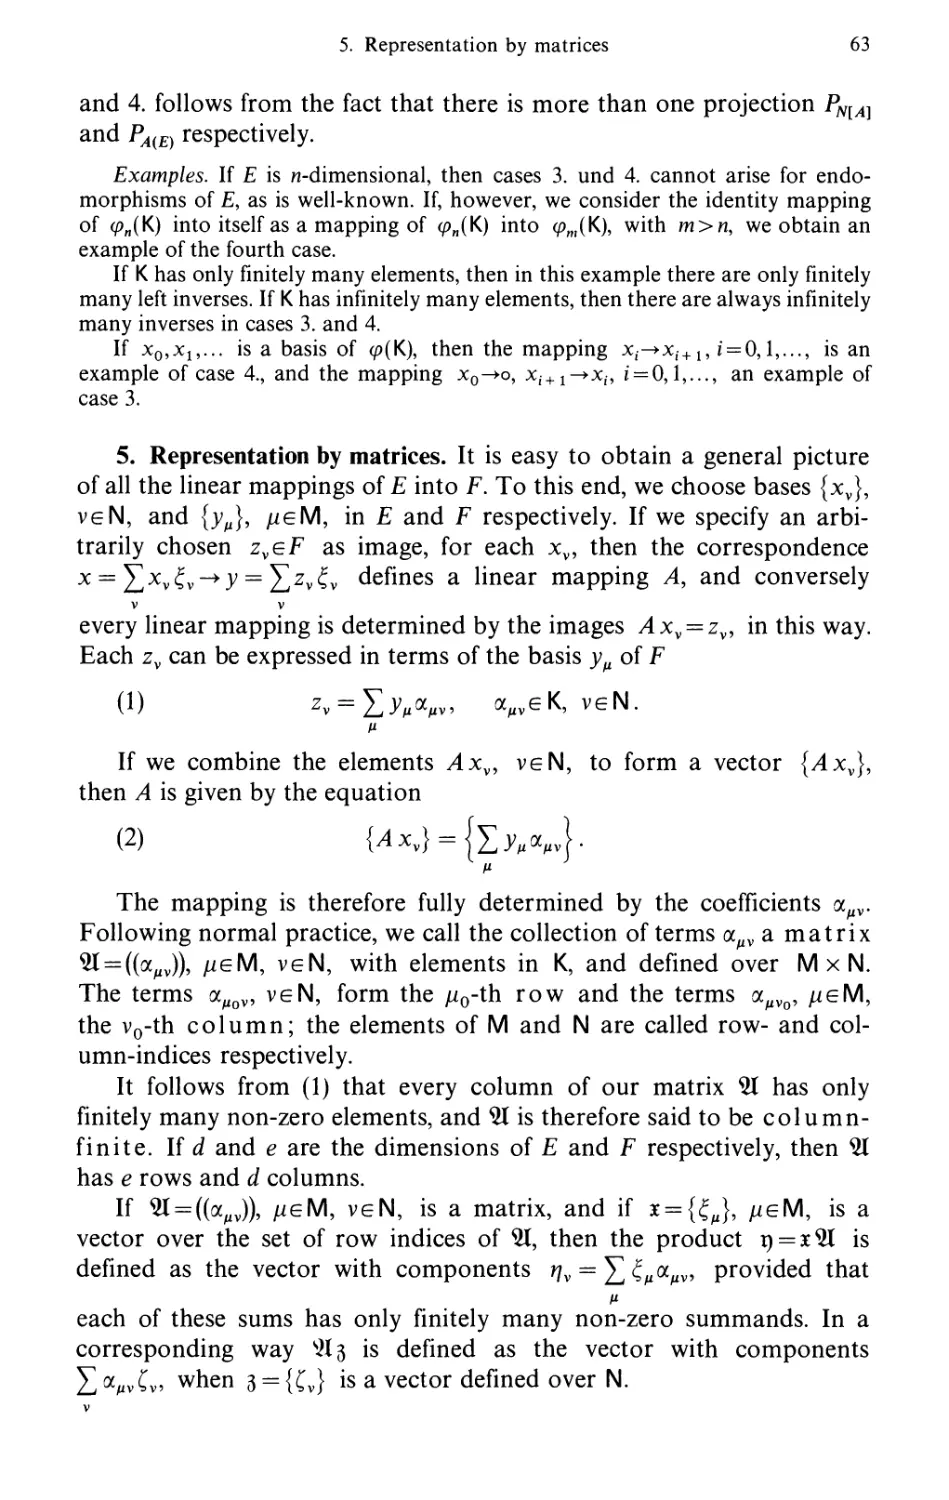 5. Representation by matrices